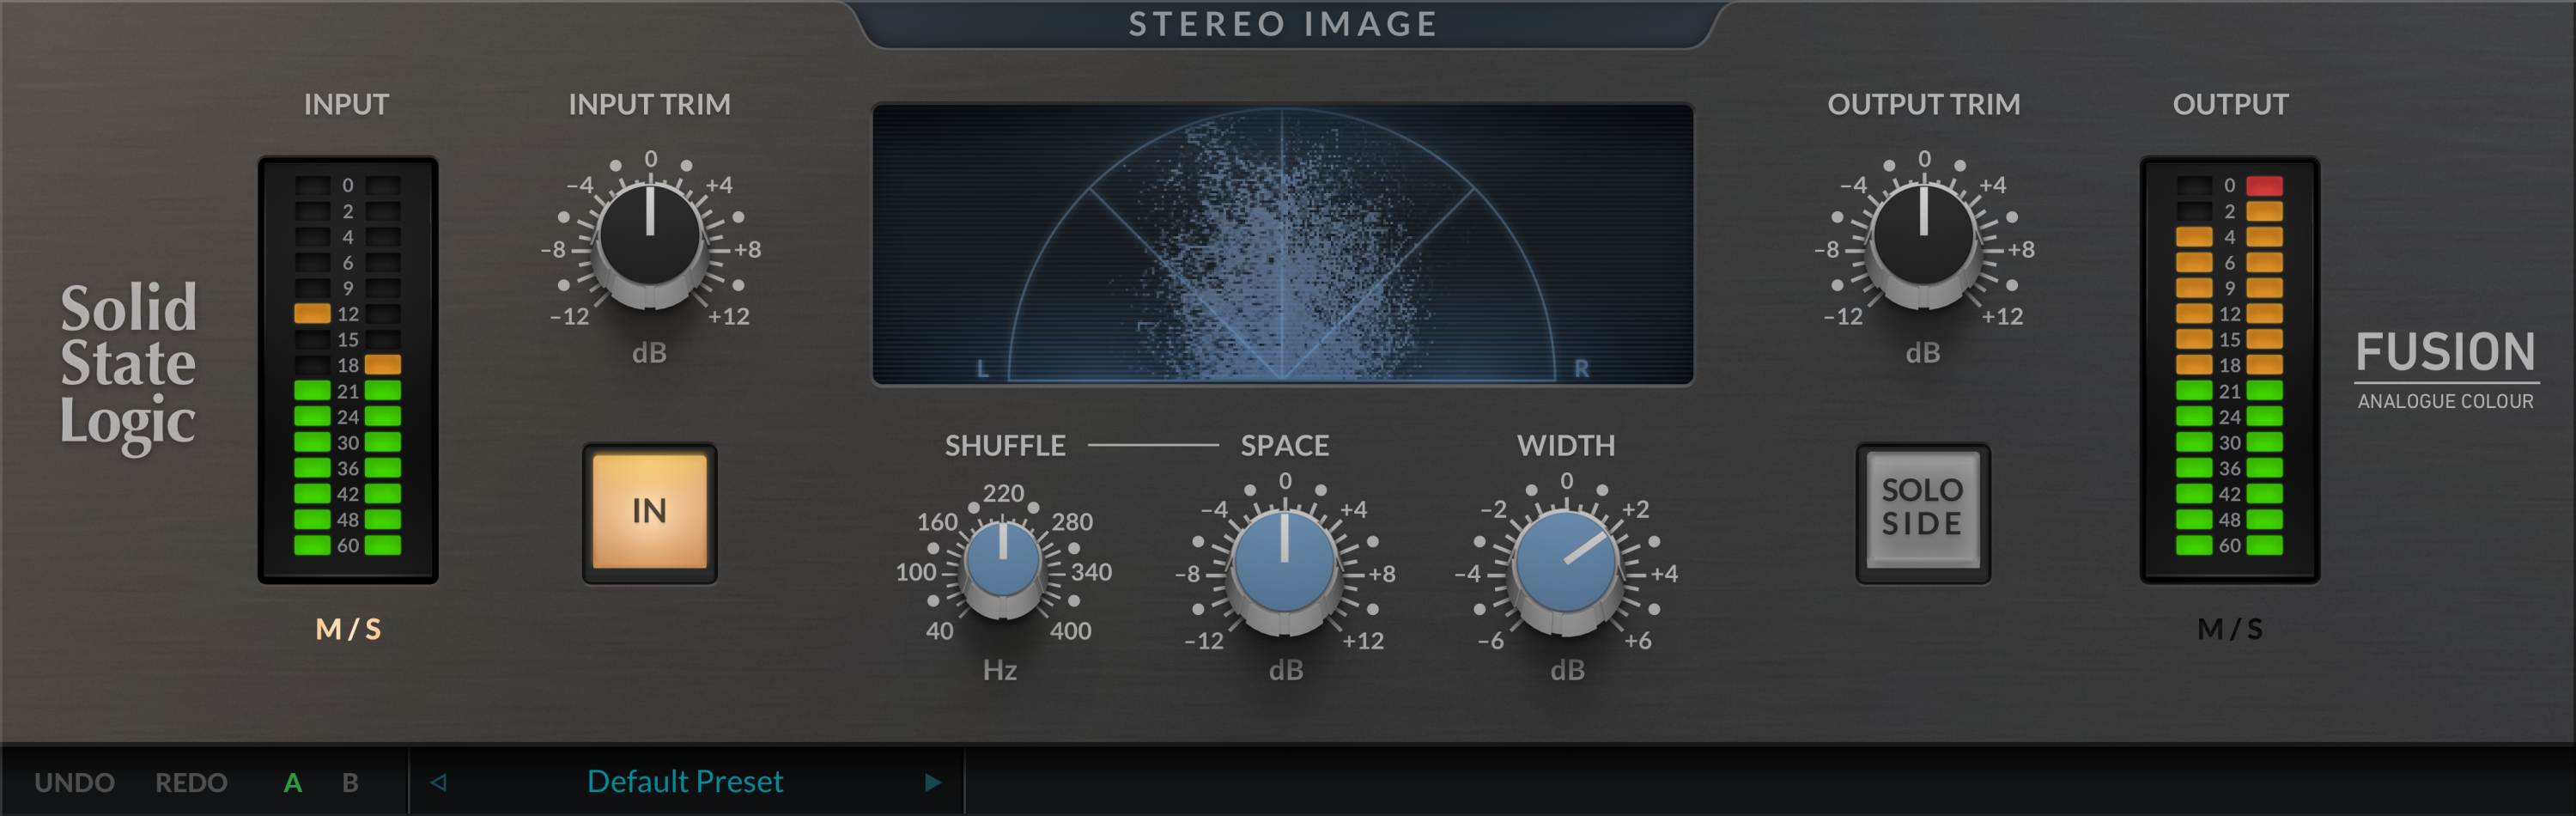 Bundled Item: Solid State Logic Fusion Stereo Image Plug-in